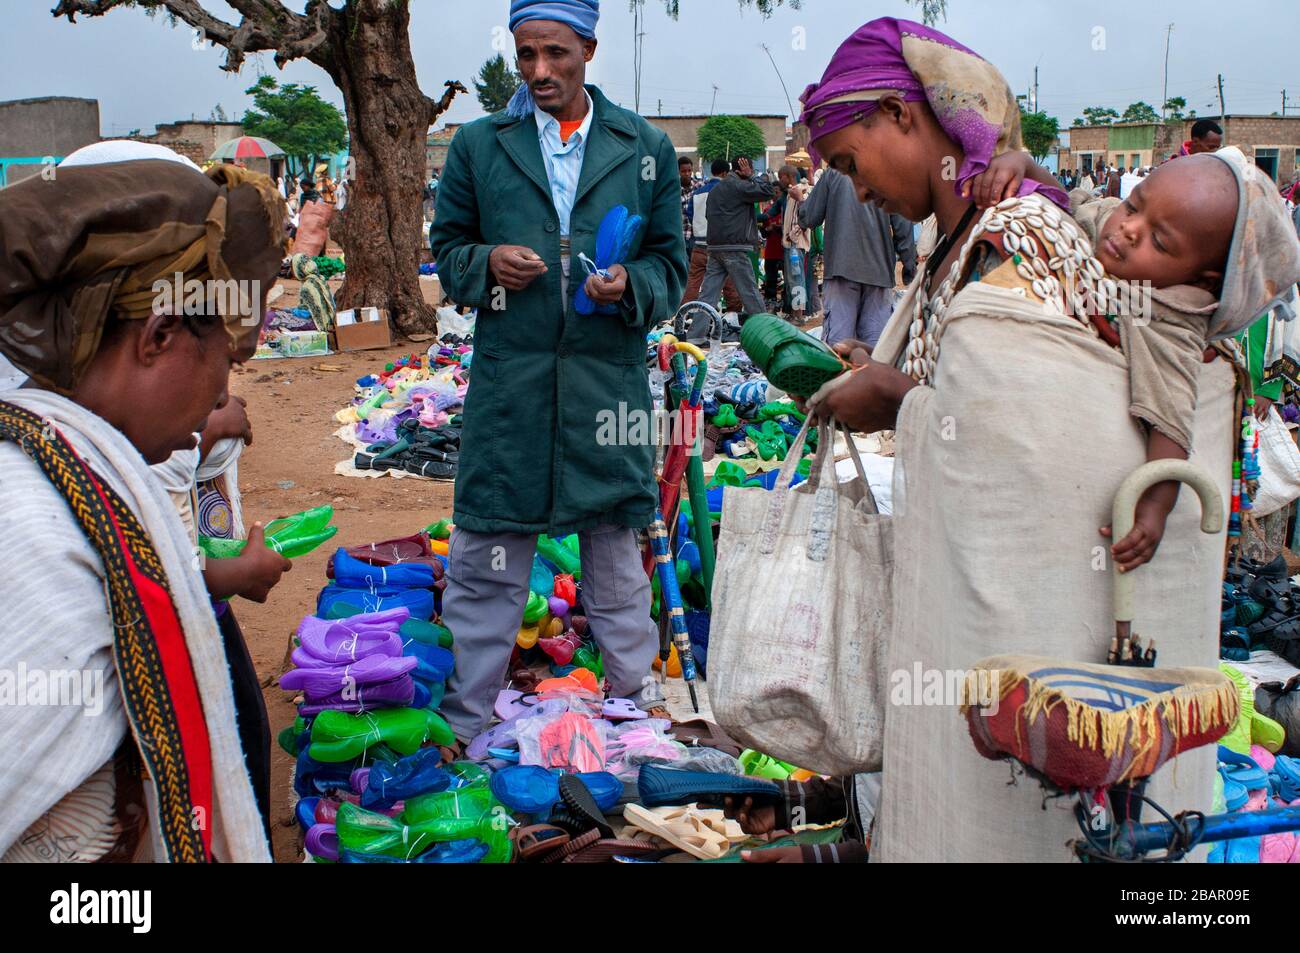 Vendors sell produce at the public market in the town of Hawzen, Tigray Region, Ethiopia on a sunny day. Stock Photo